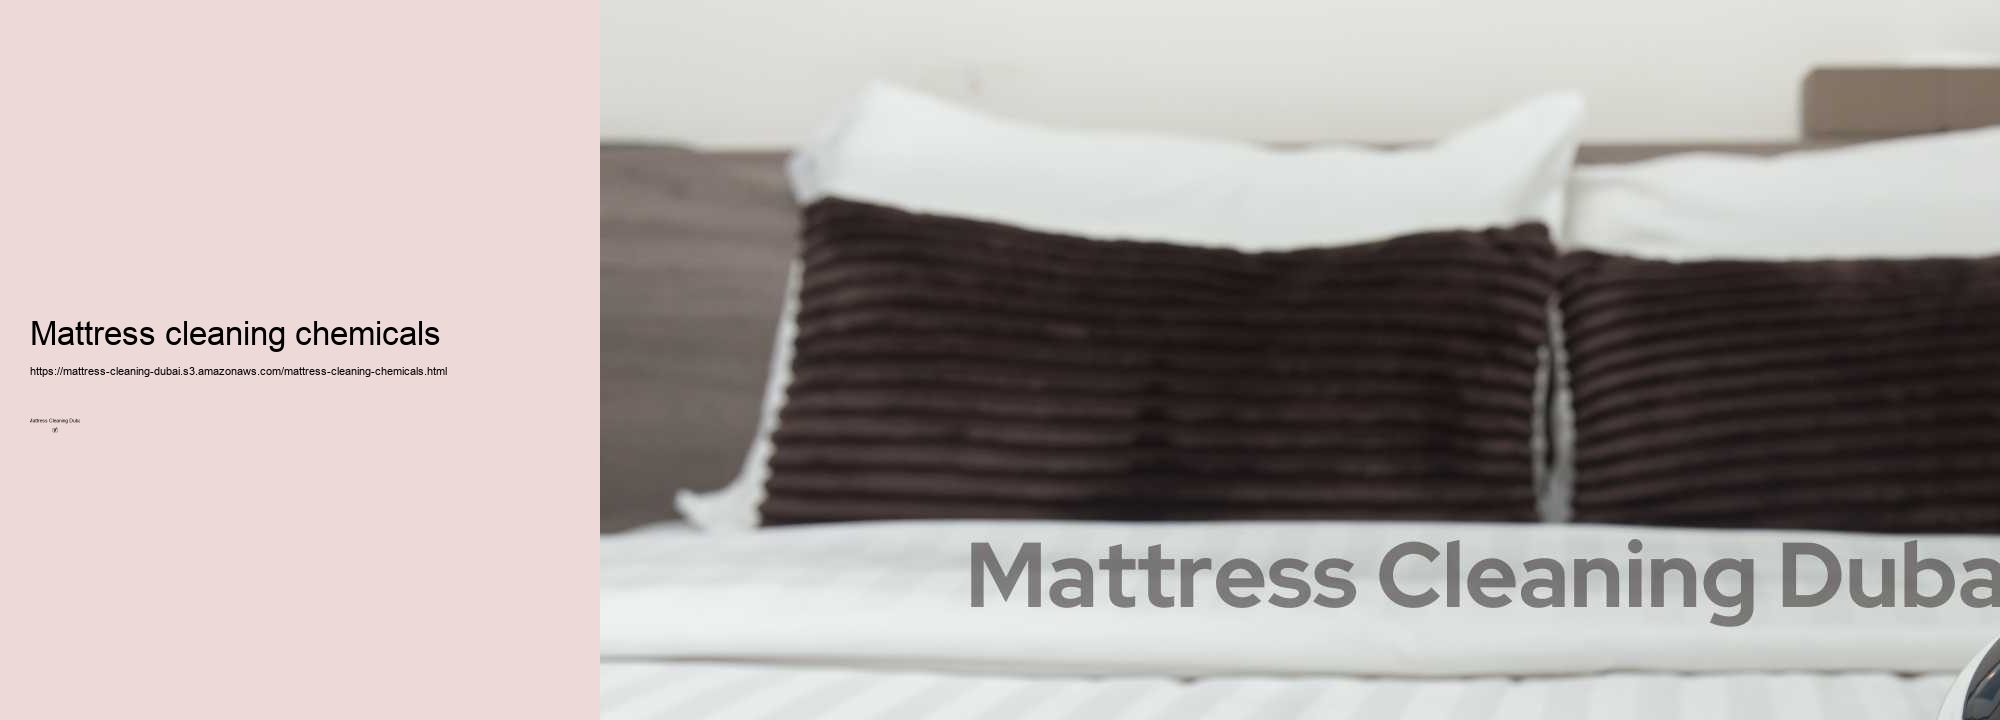 Mattress cleaning chemicals